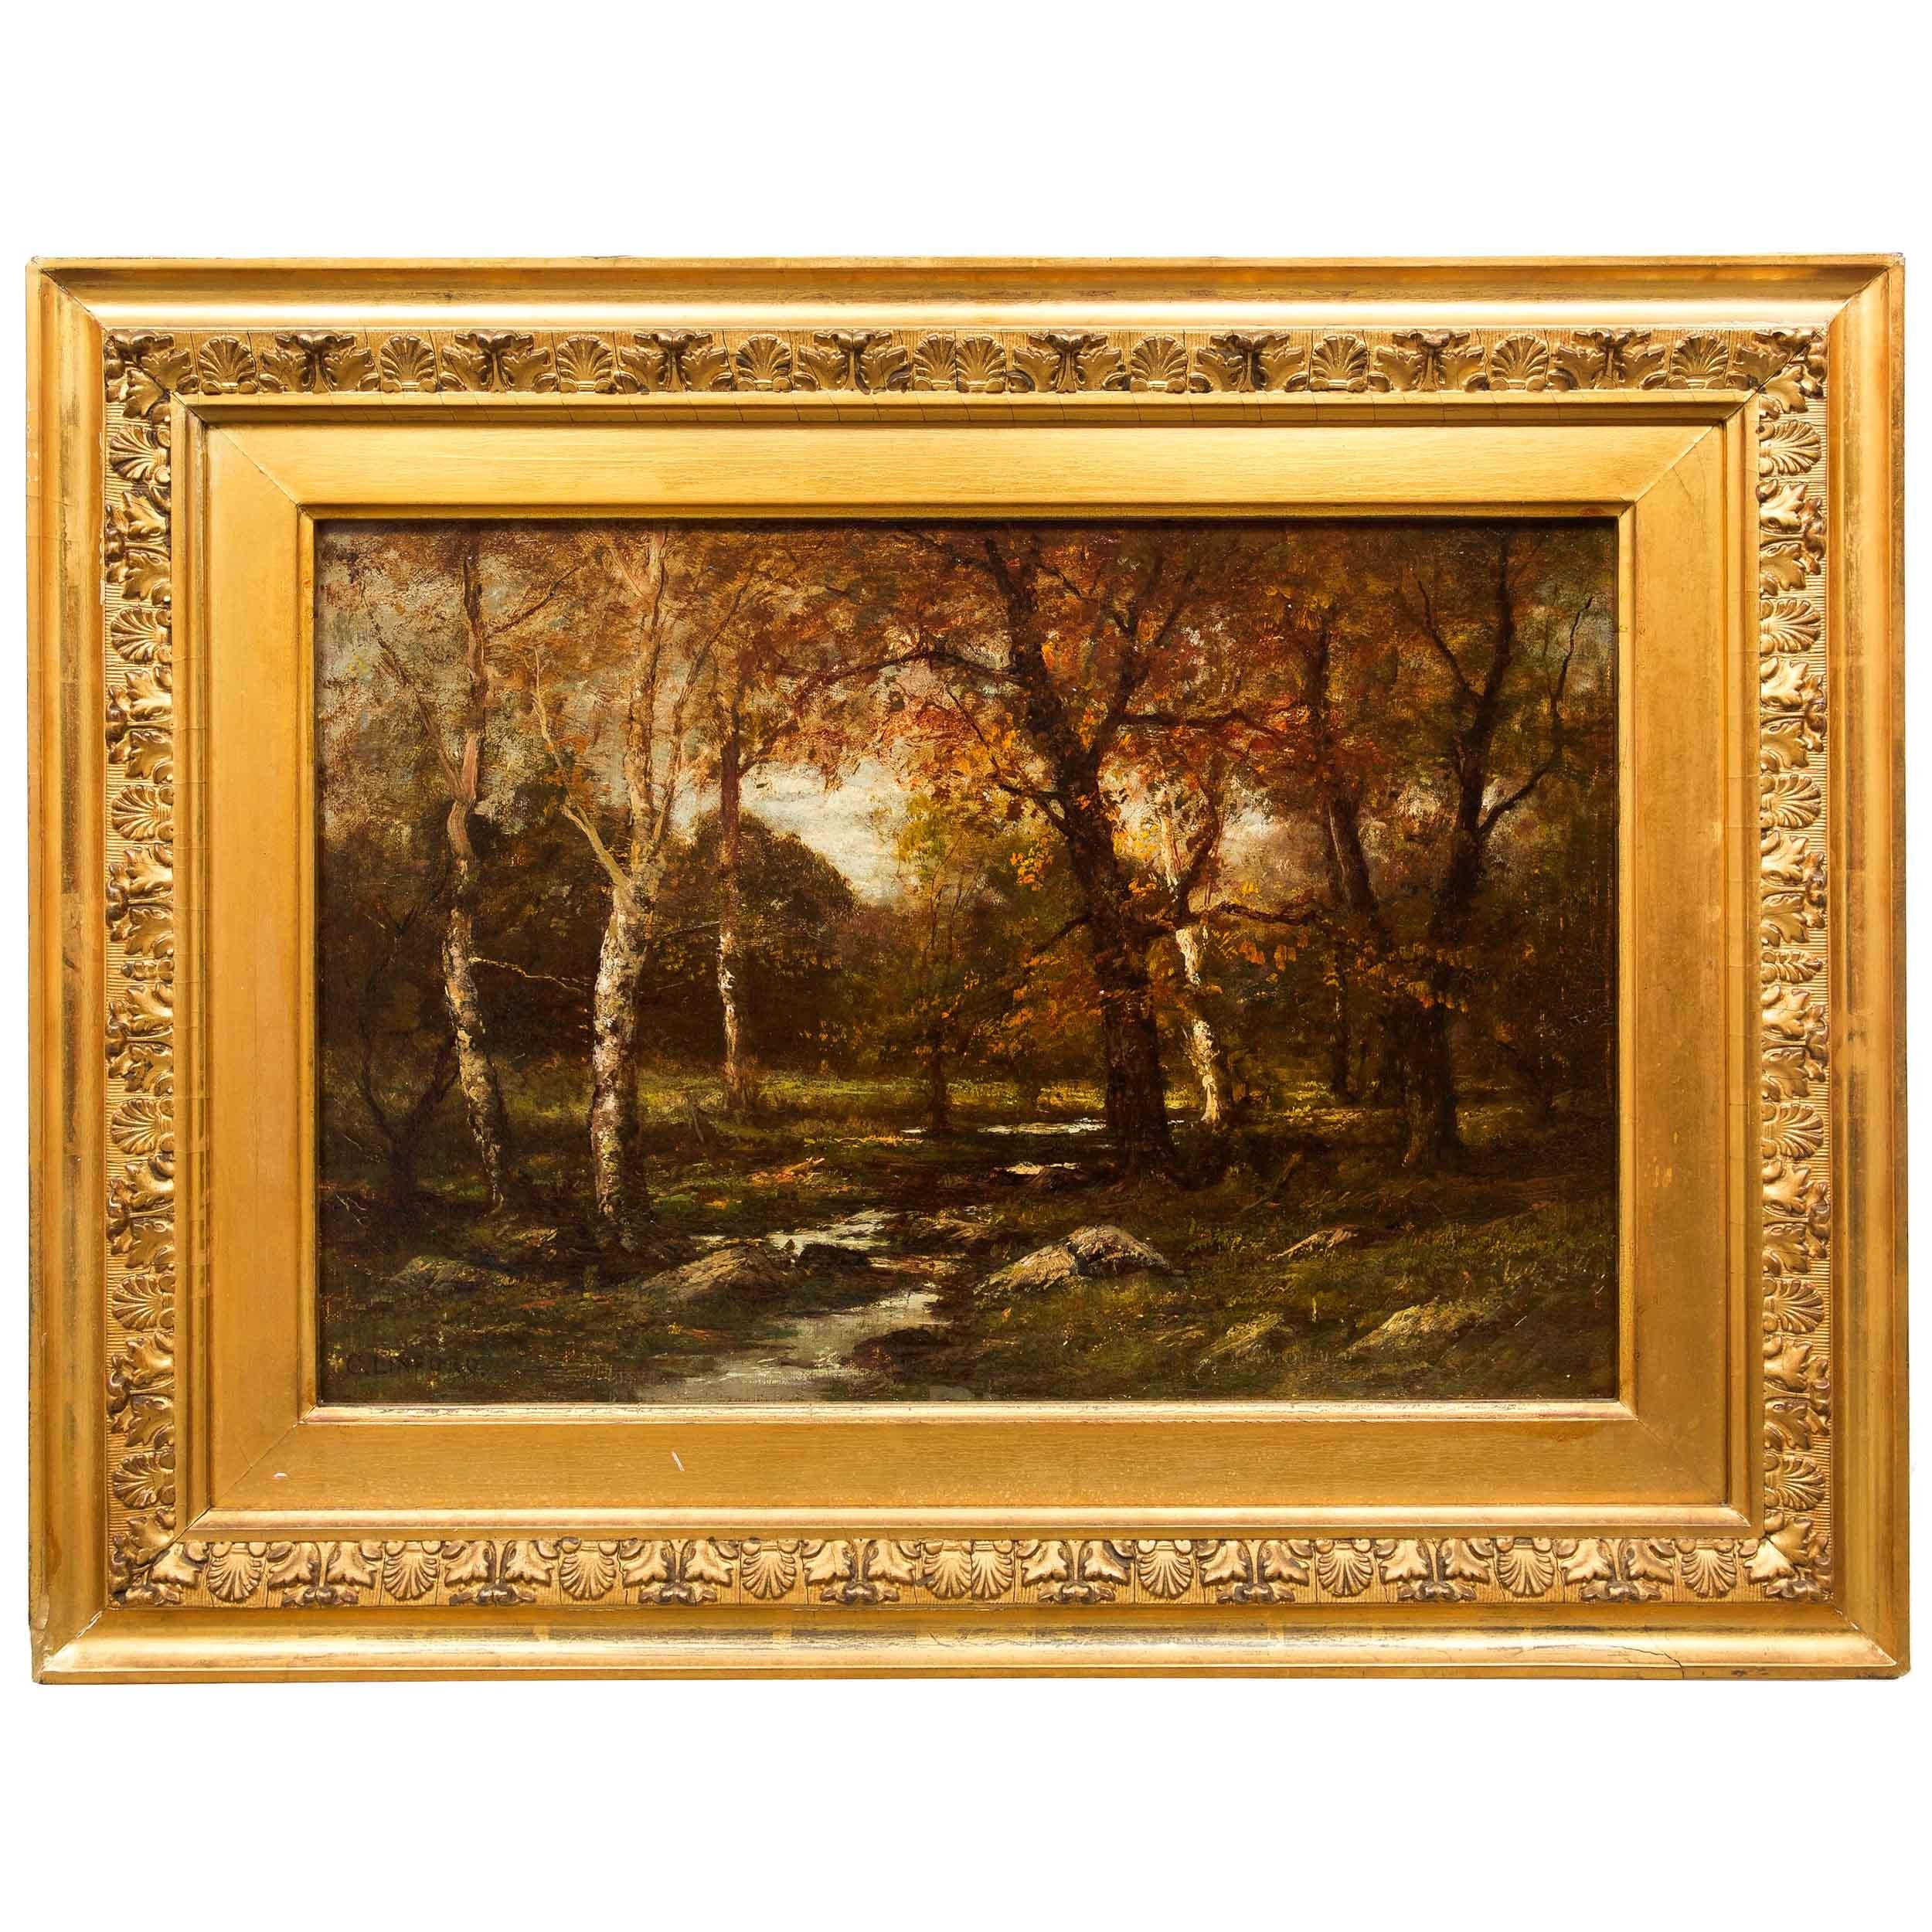 A warm autumn view capturing birch trees in a loosely wooded forest with a small stream meandering through the center, it is an interesting work for the use of light throughout the scene. Captured during the late hours of the day as the sun is